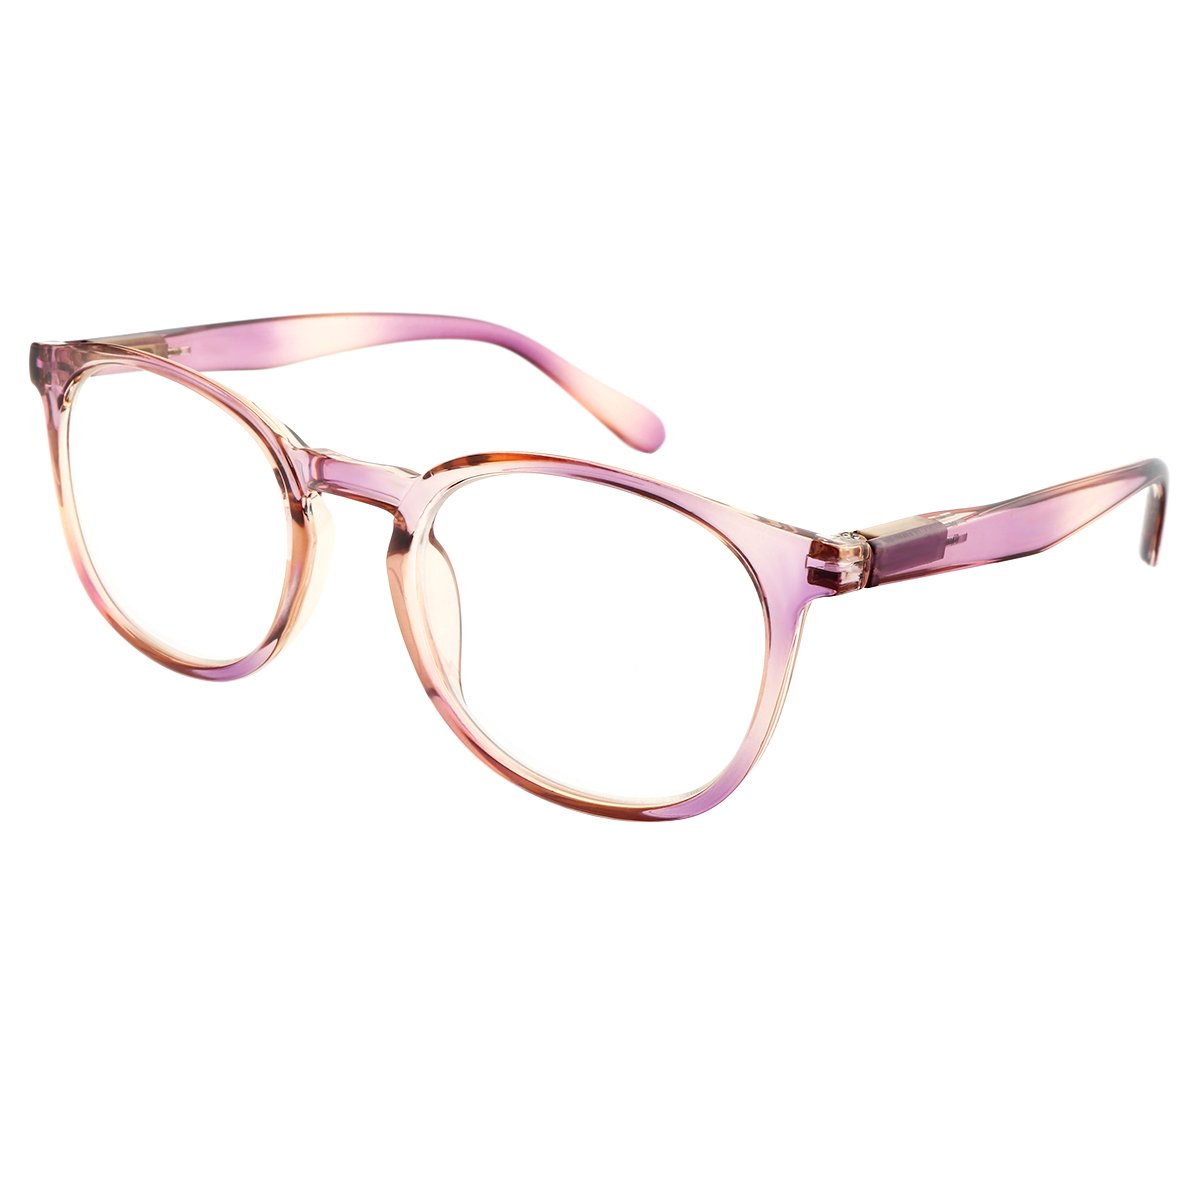 Gina - Square Pink Reading Glasses for Women